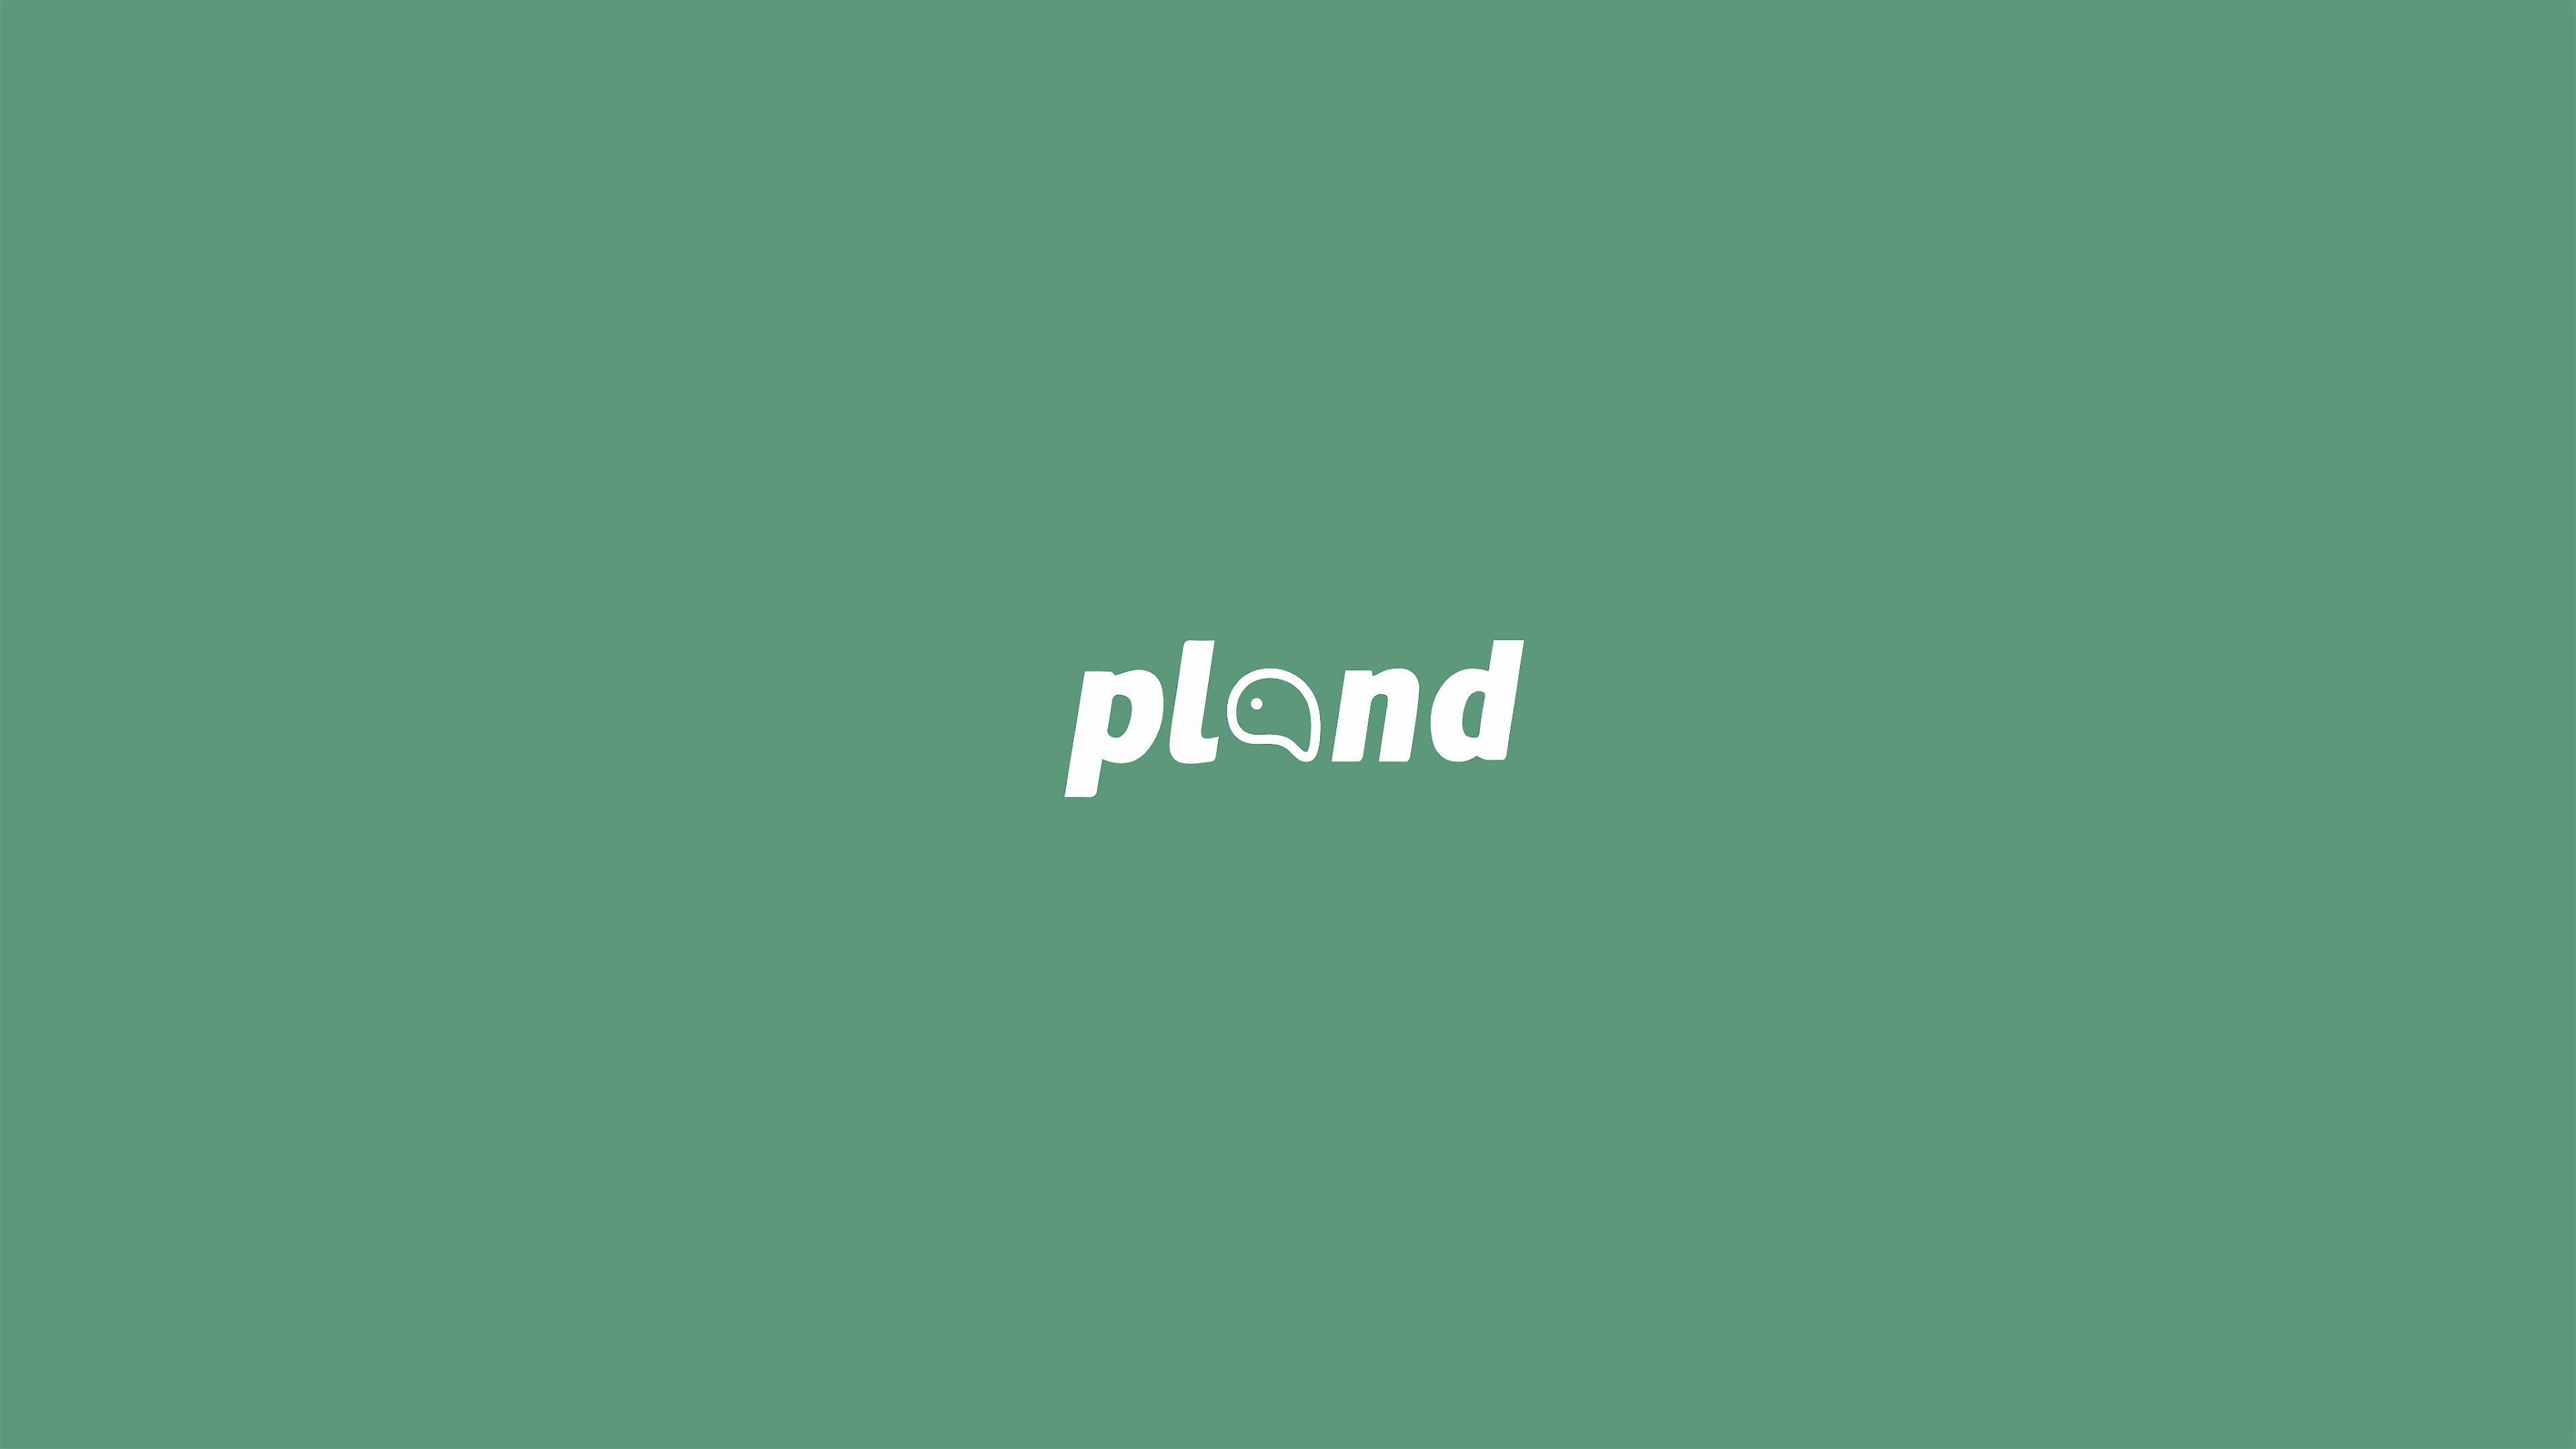 Android Apps by pland on Google Play